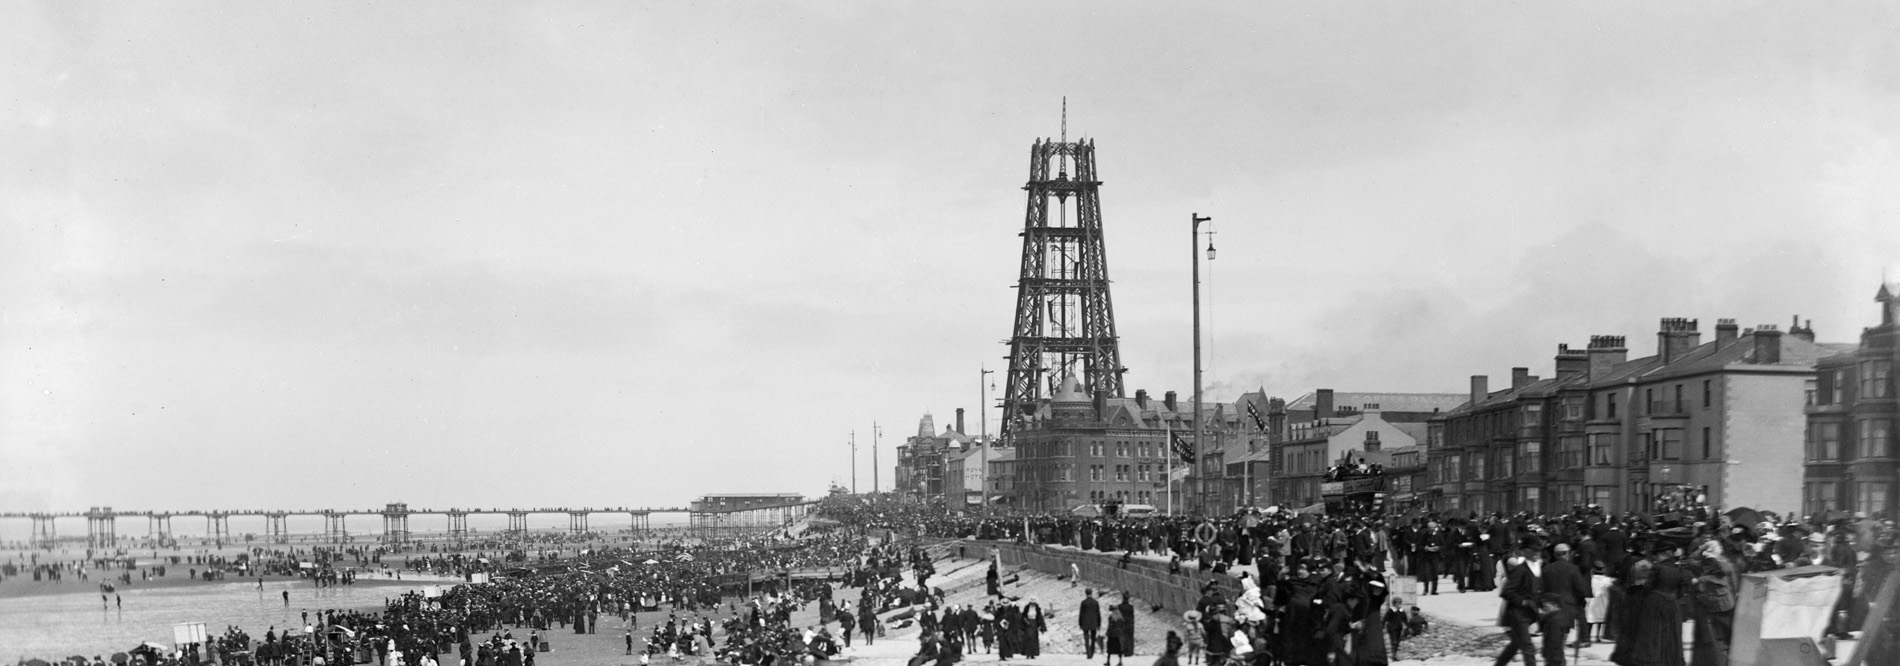 Black and White image of The Blackpool Tower - History